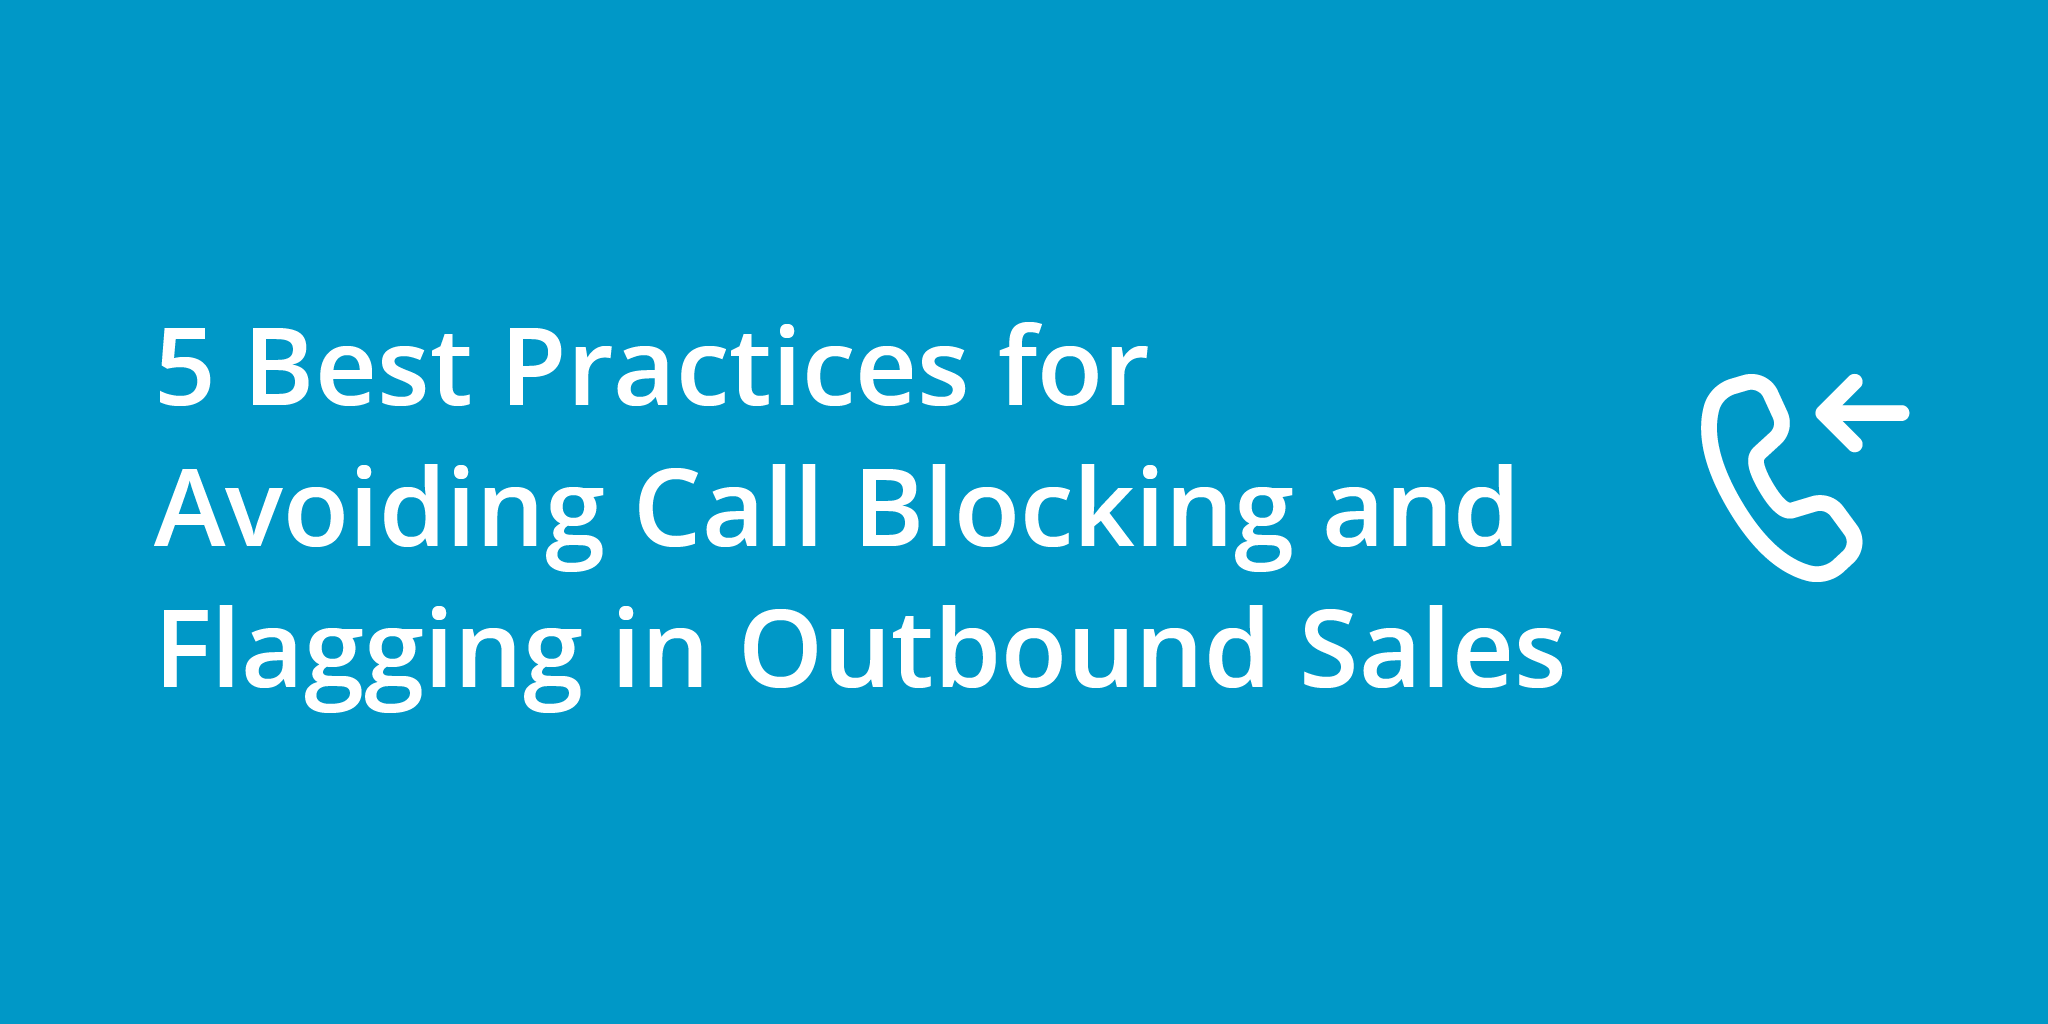 5 Best Practices for Avoiding Call Blocking and Flagging in Outbound Sales